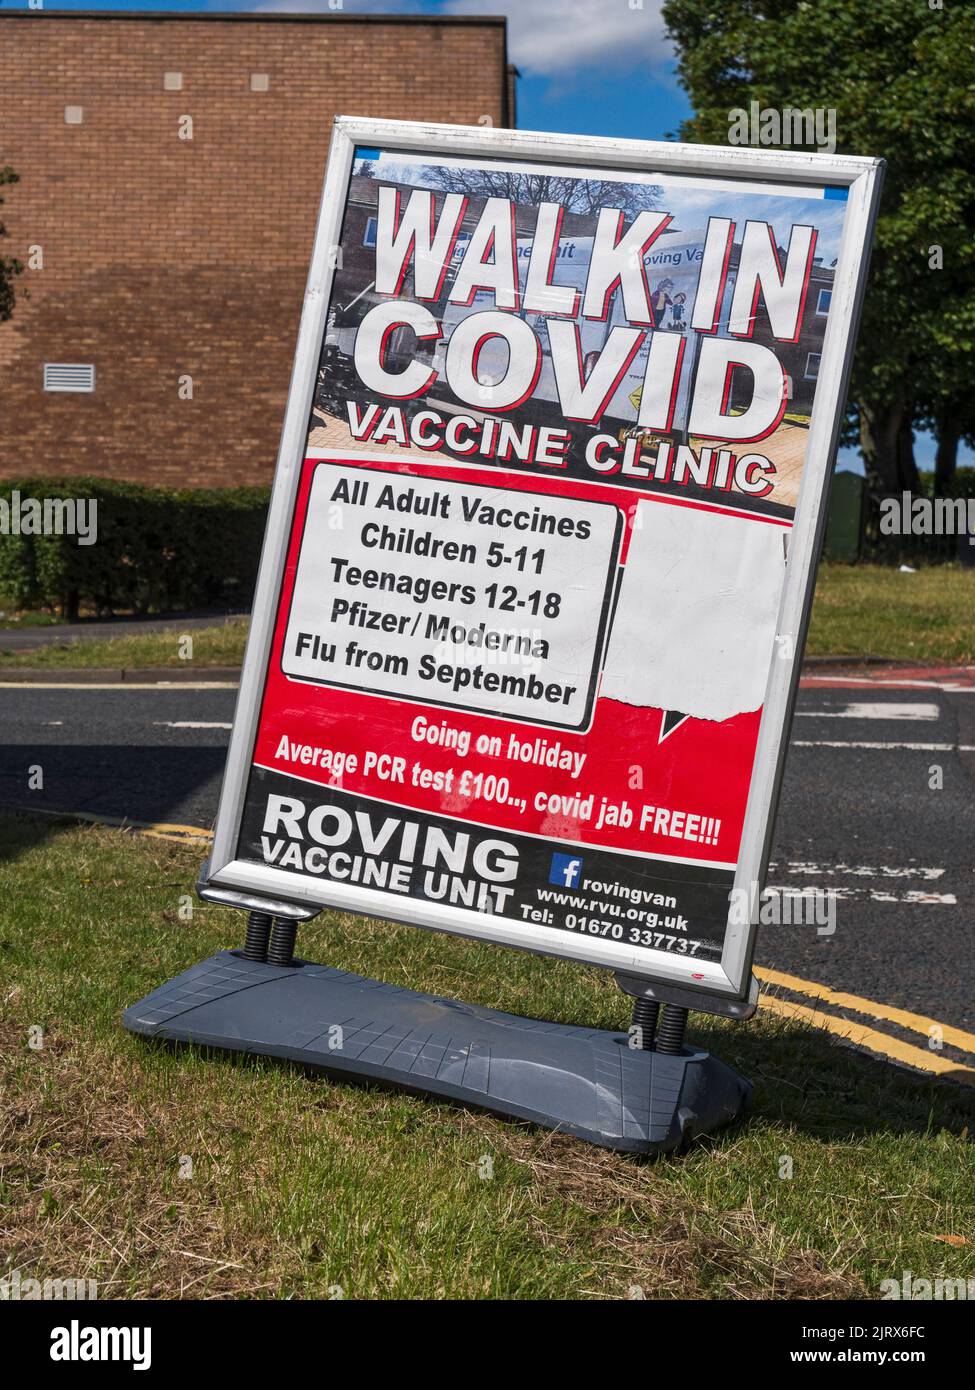 Sign advertising a roving vaccine unit in the wake of the Covid-19 pandemic, UK Stock Photo